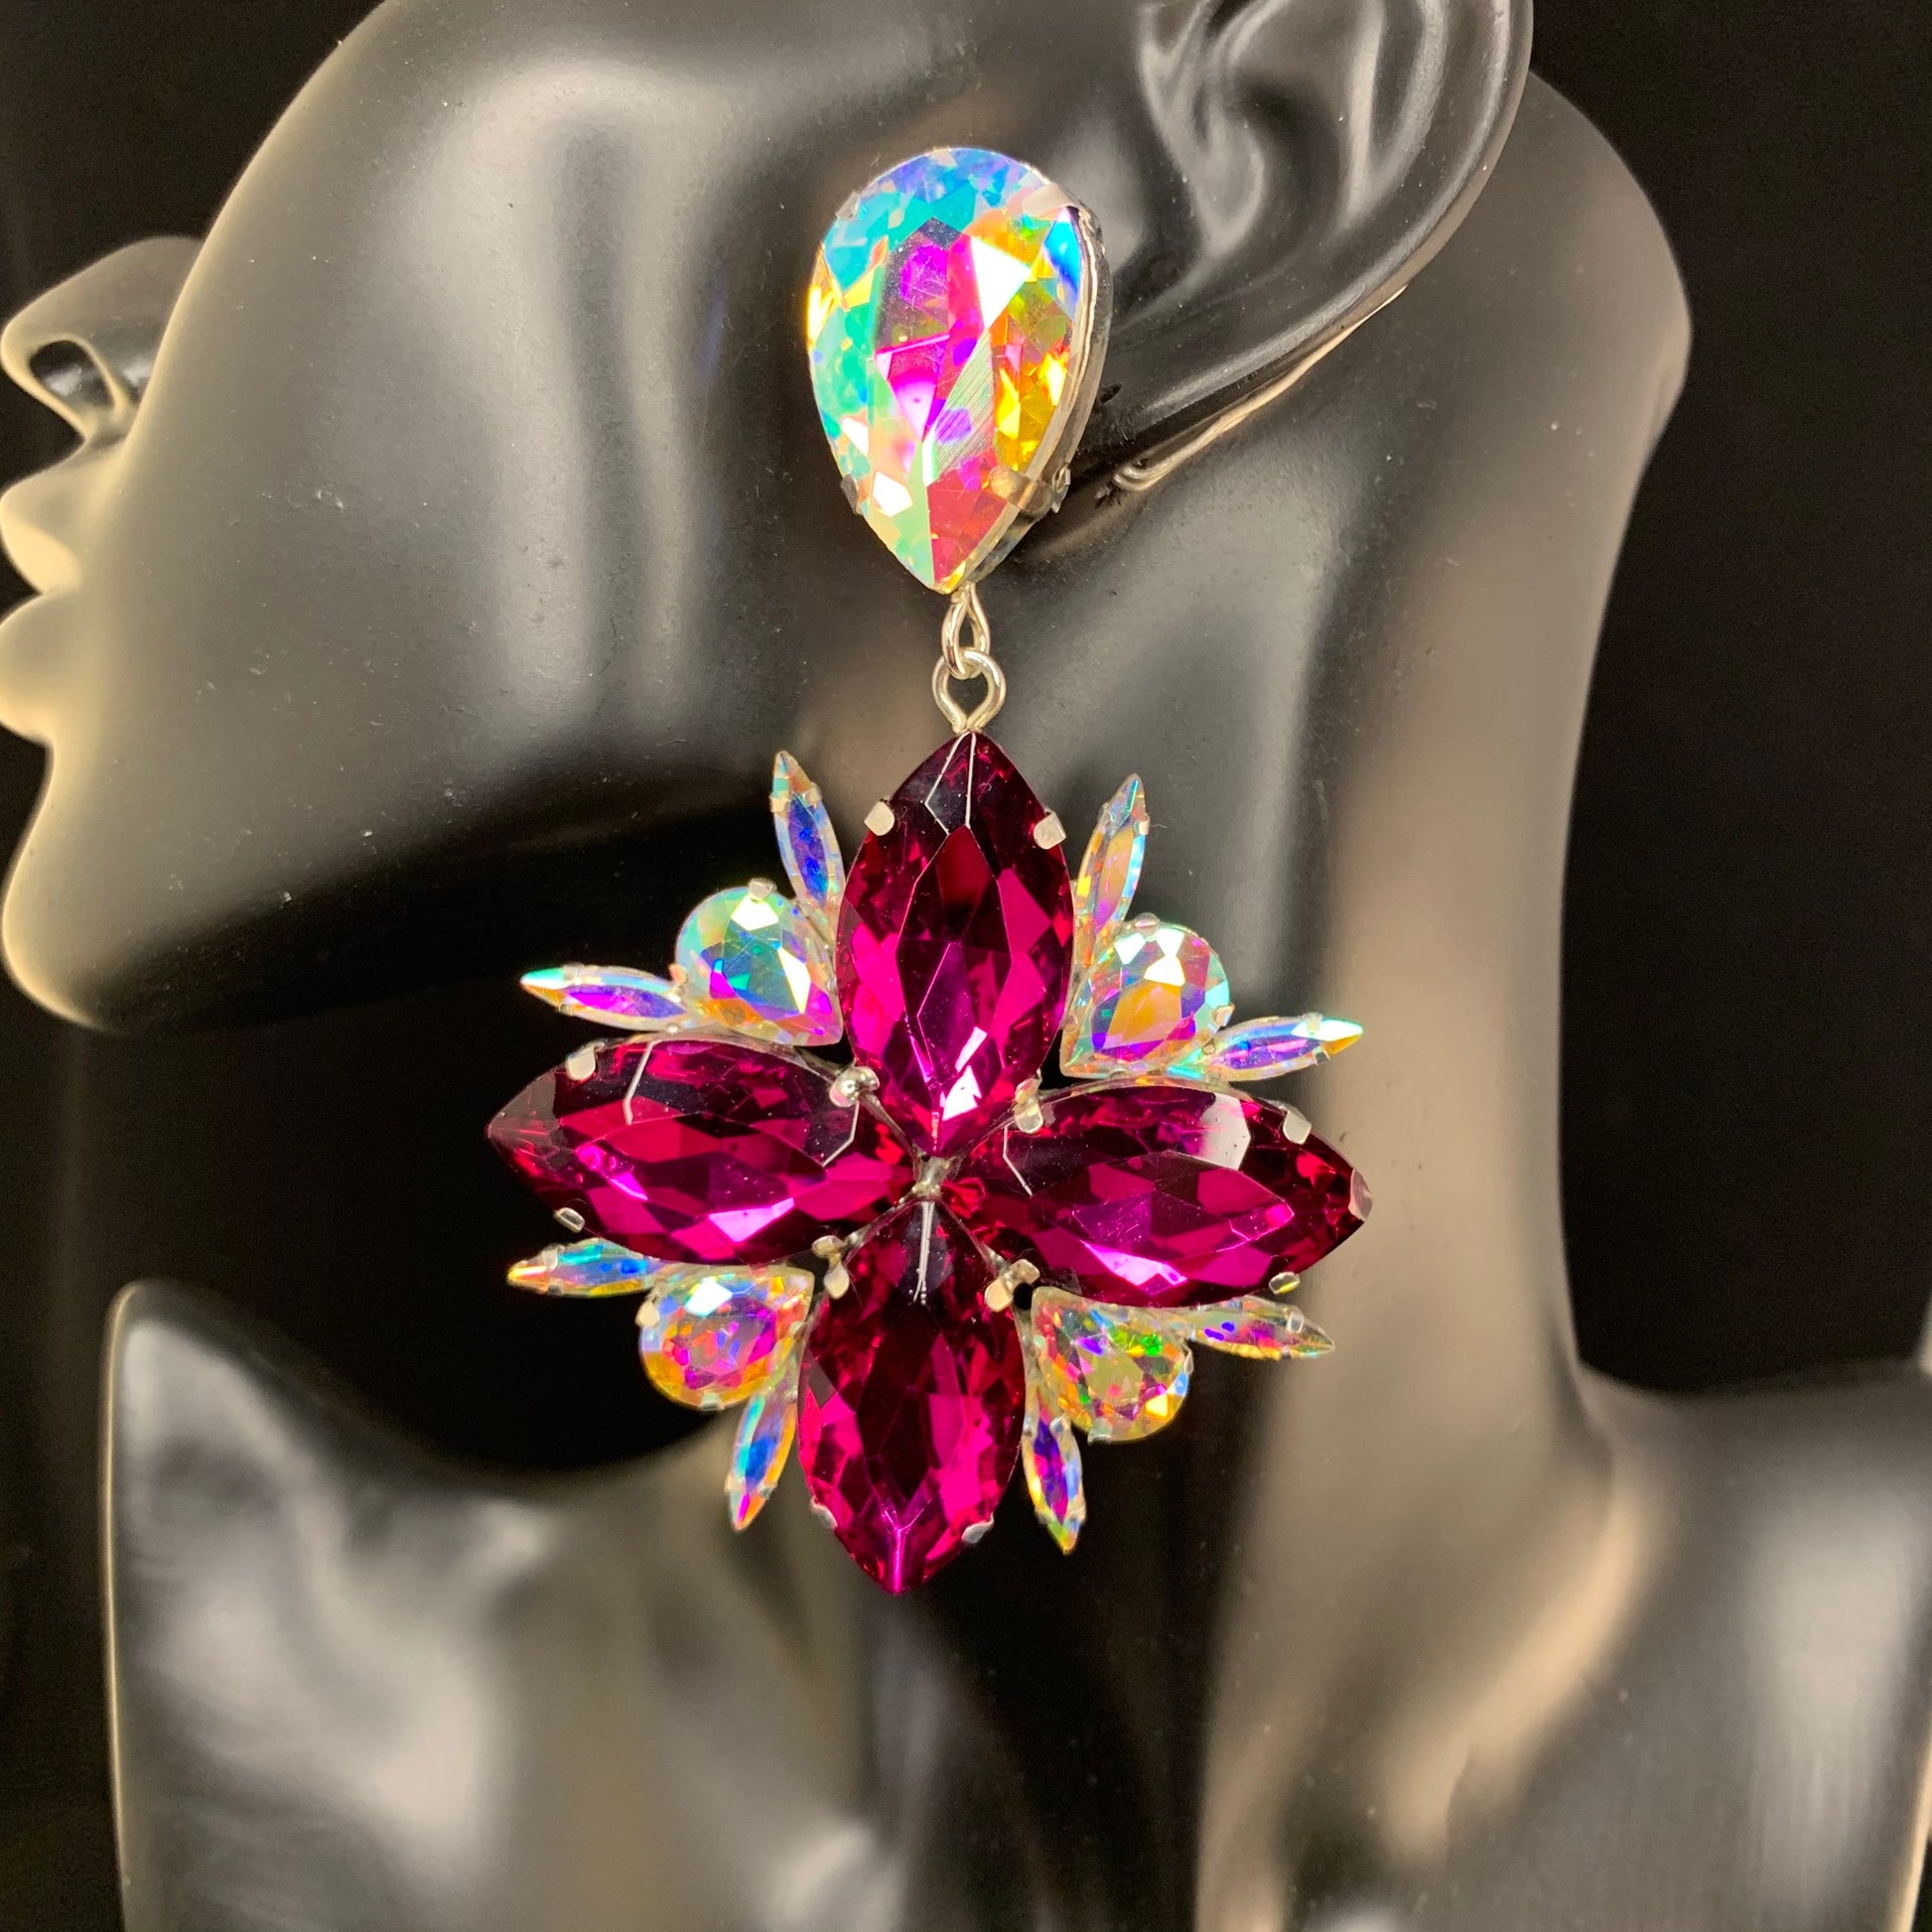 Crystal Earrings / Clip On or Pierced / Statement Earrings / Crystal Jewelry / Dress Earrings / Drag Queen